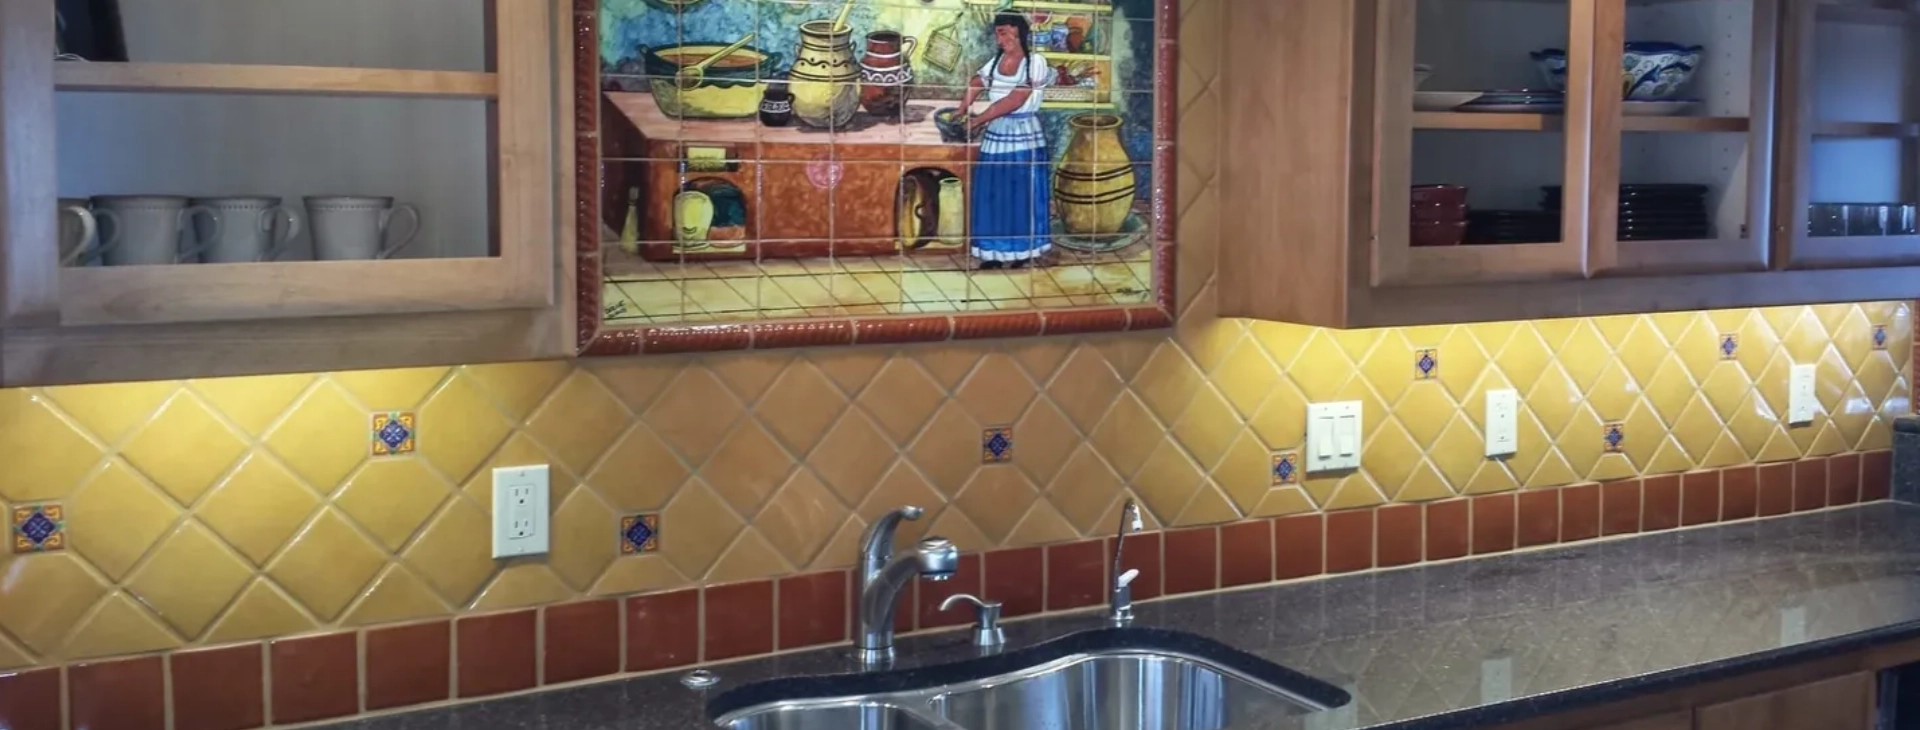 A kitchen with a sink and a mural on the wall